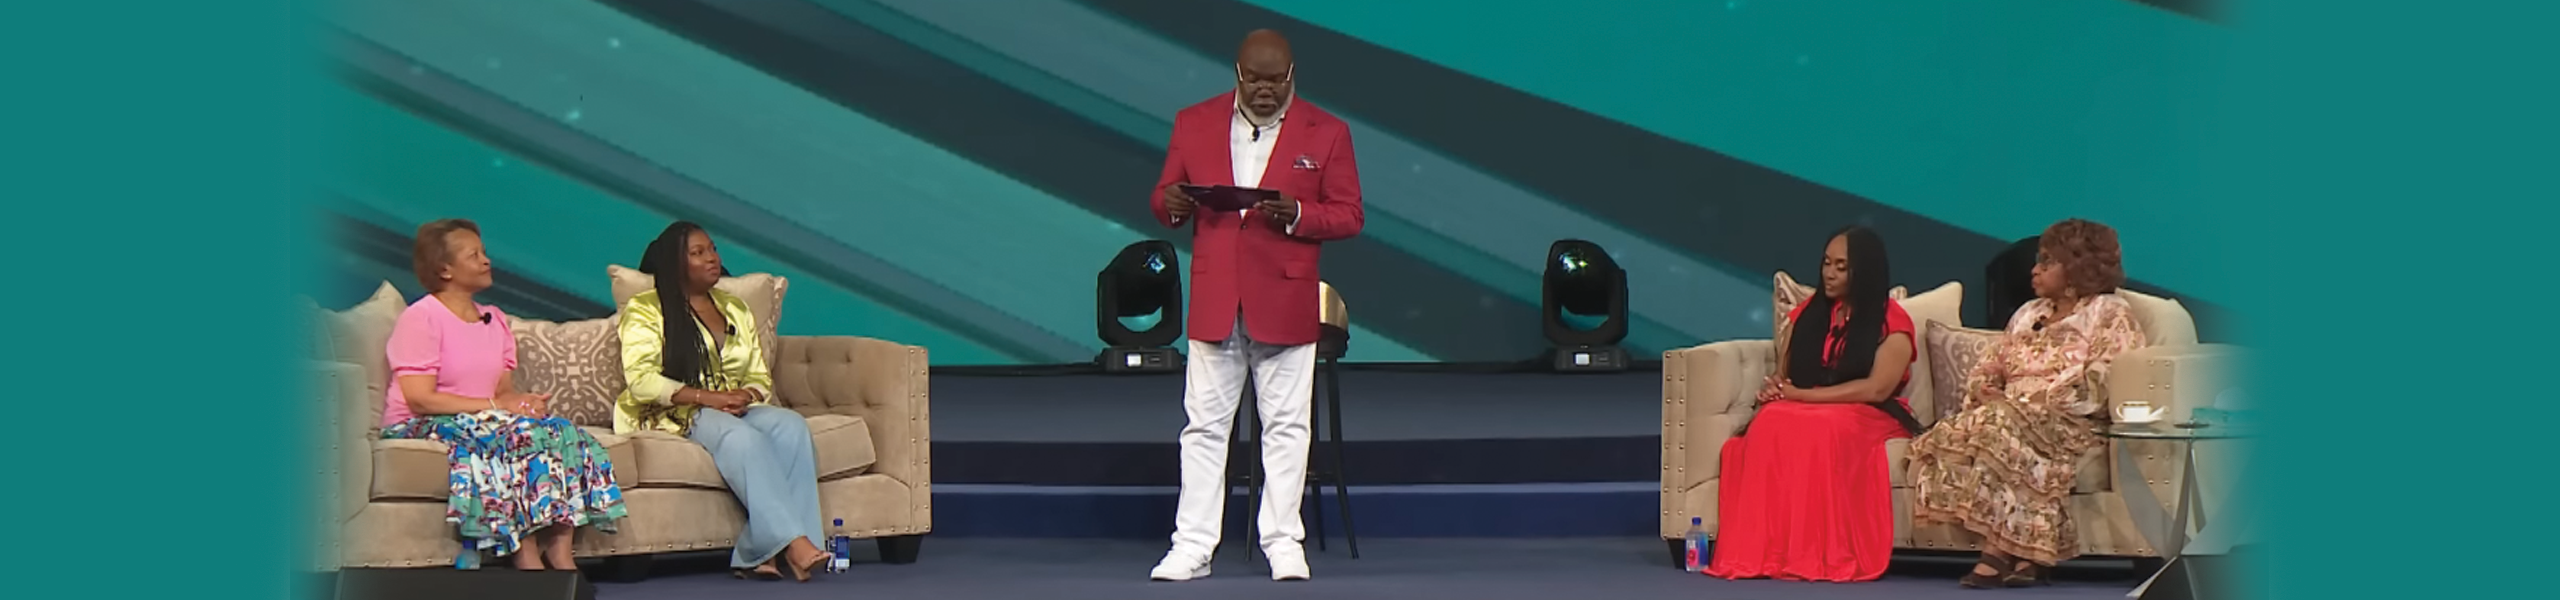 Wednesday Night Bible Study | T.D. Jakes